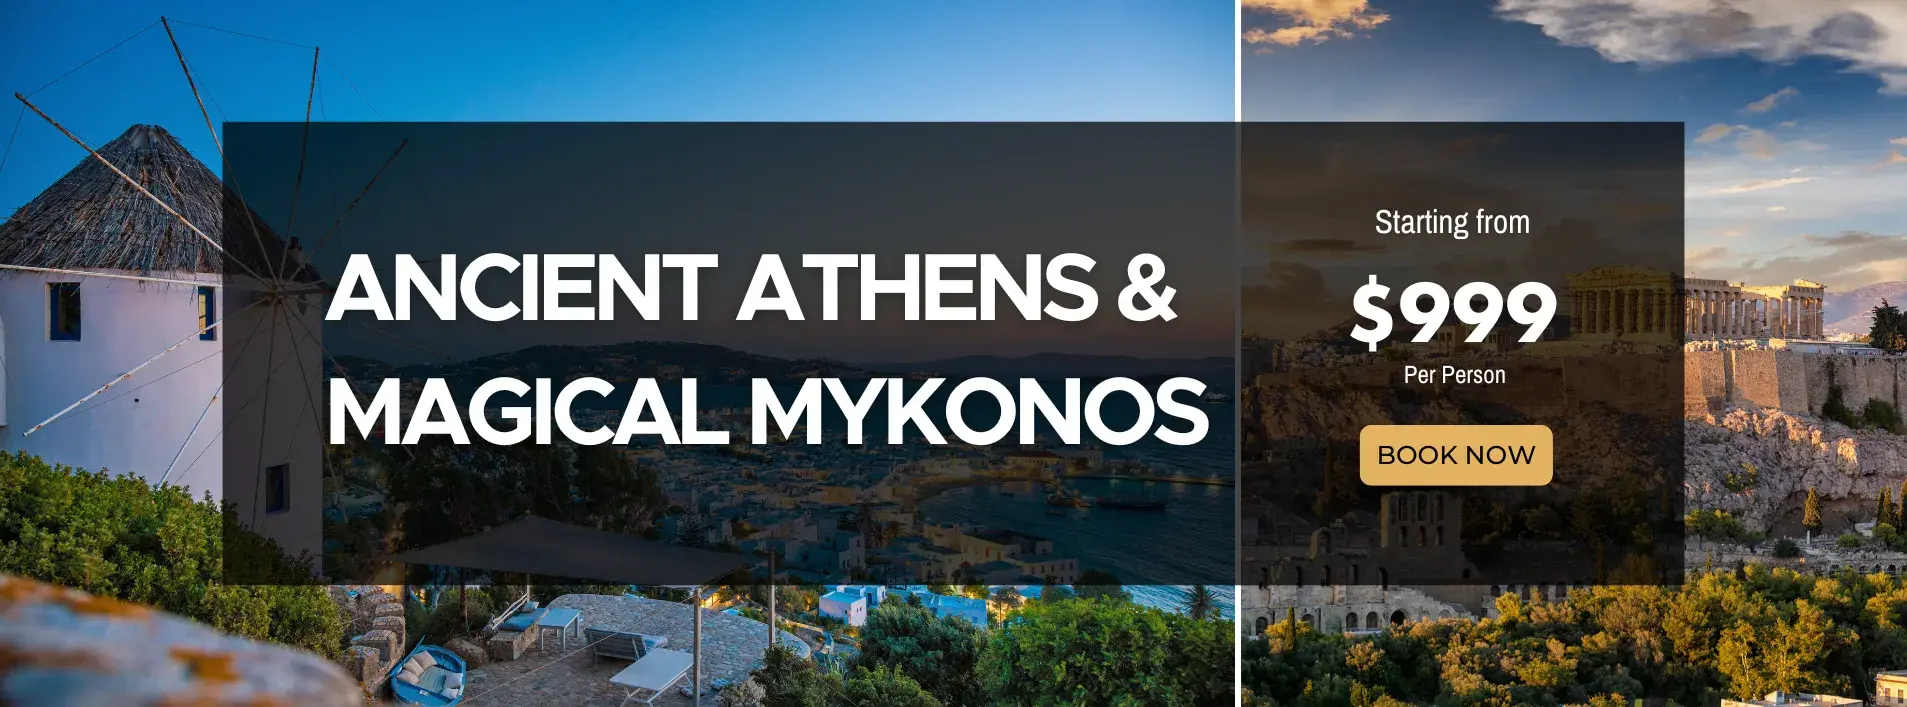 Ancient Athens & Magical Mykonos W/Air and Tour